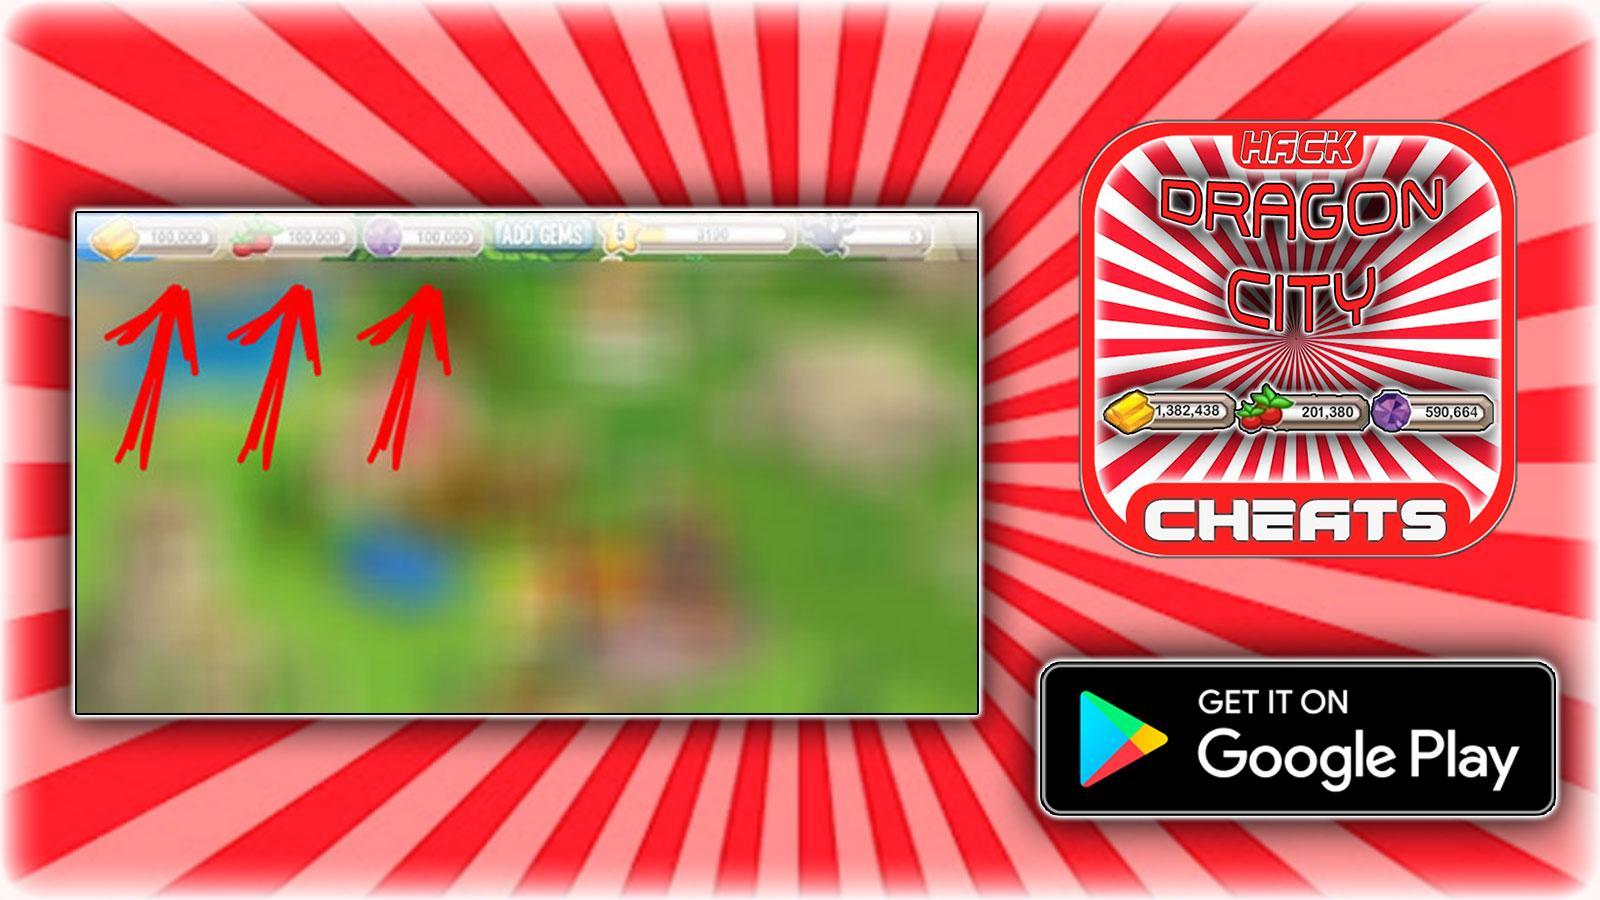 Cheats For Dragon City Hack Joke App Prank For Android Apk Download - roblox hack tool download 201